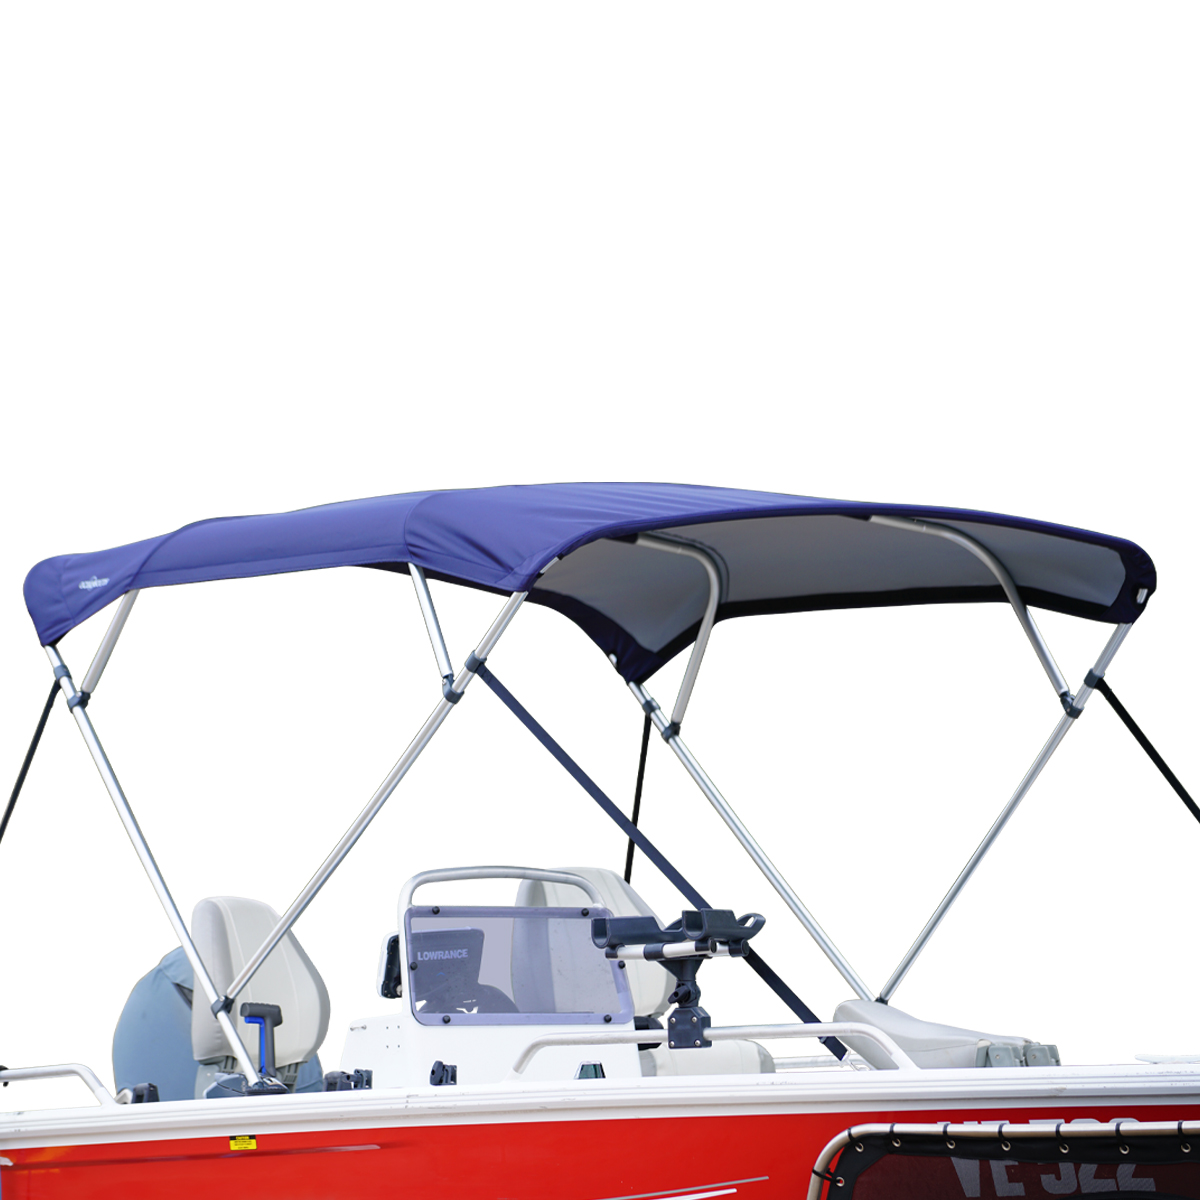 Buy 4 Bow Bimini Top for Boat & Get 20% OFF